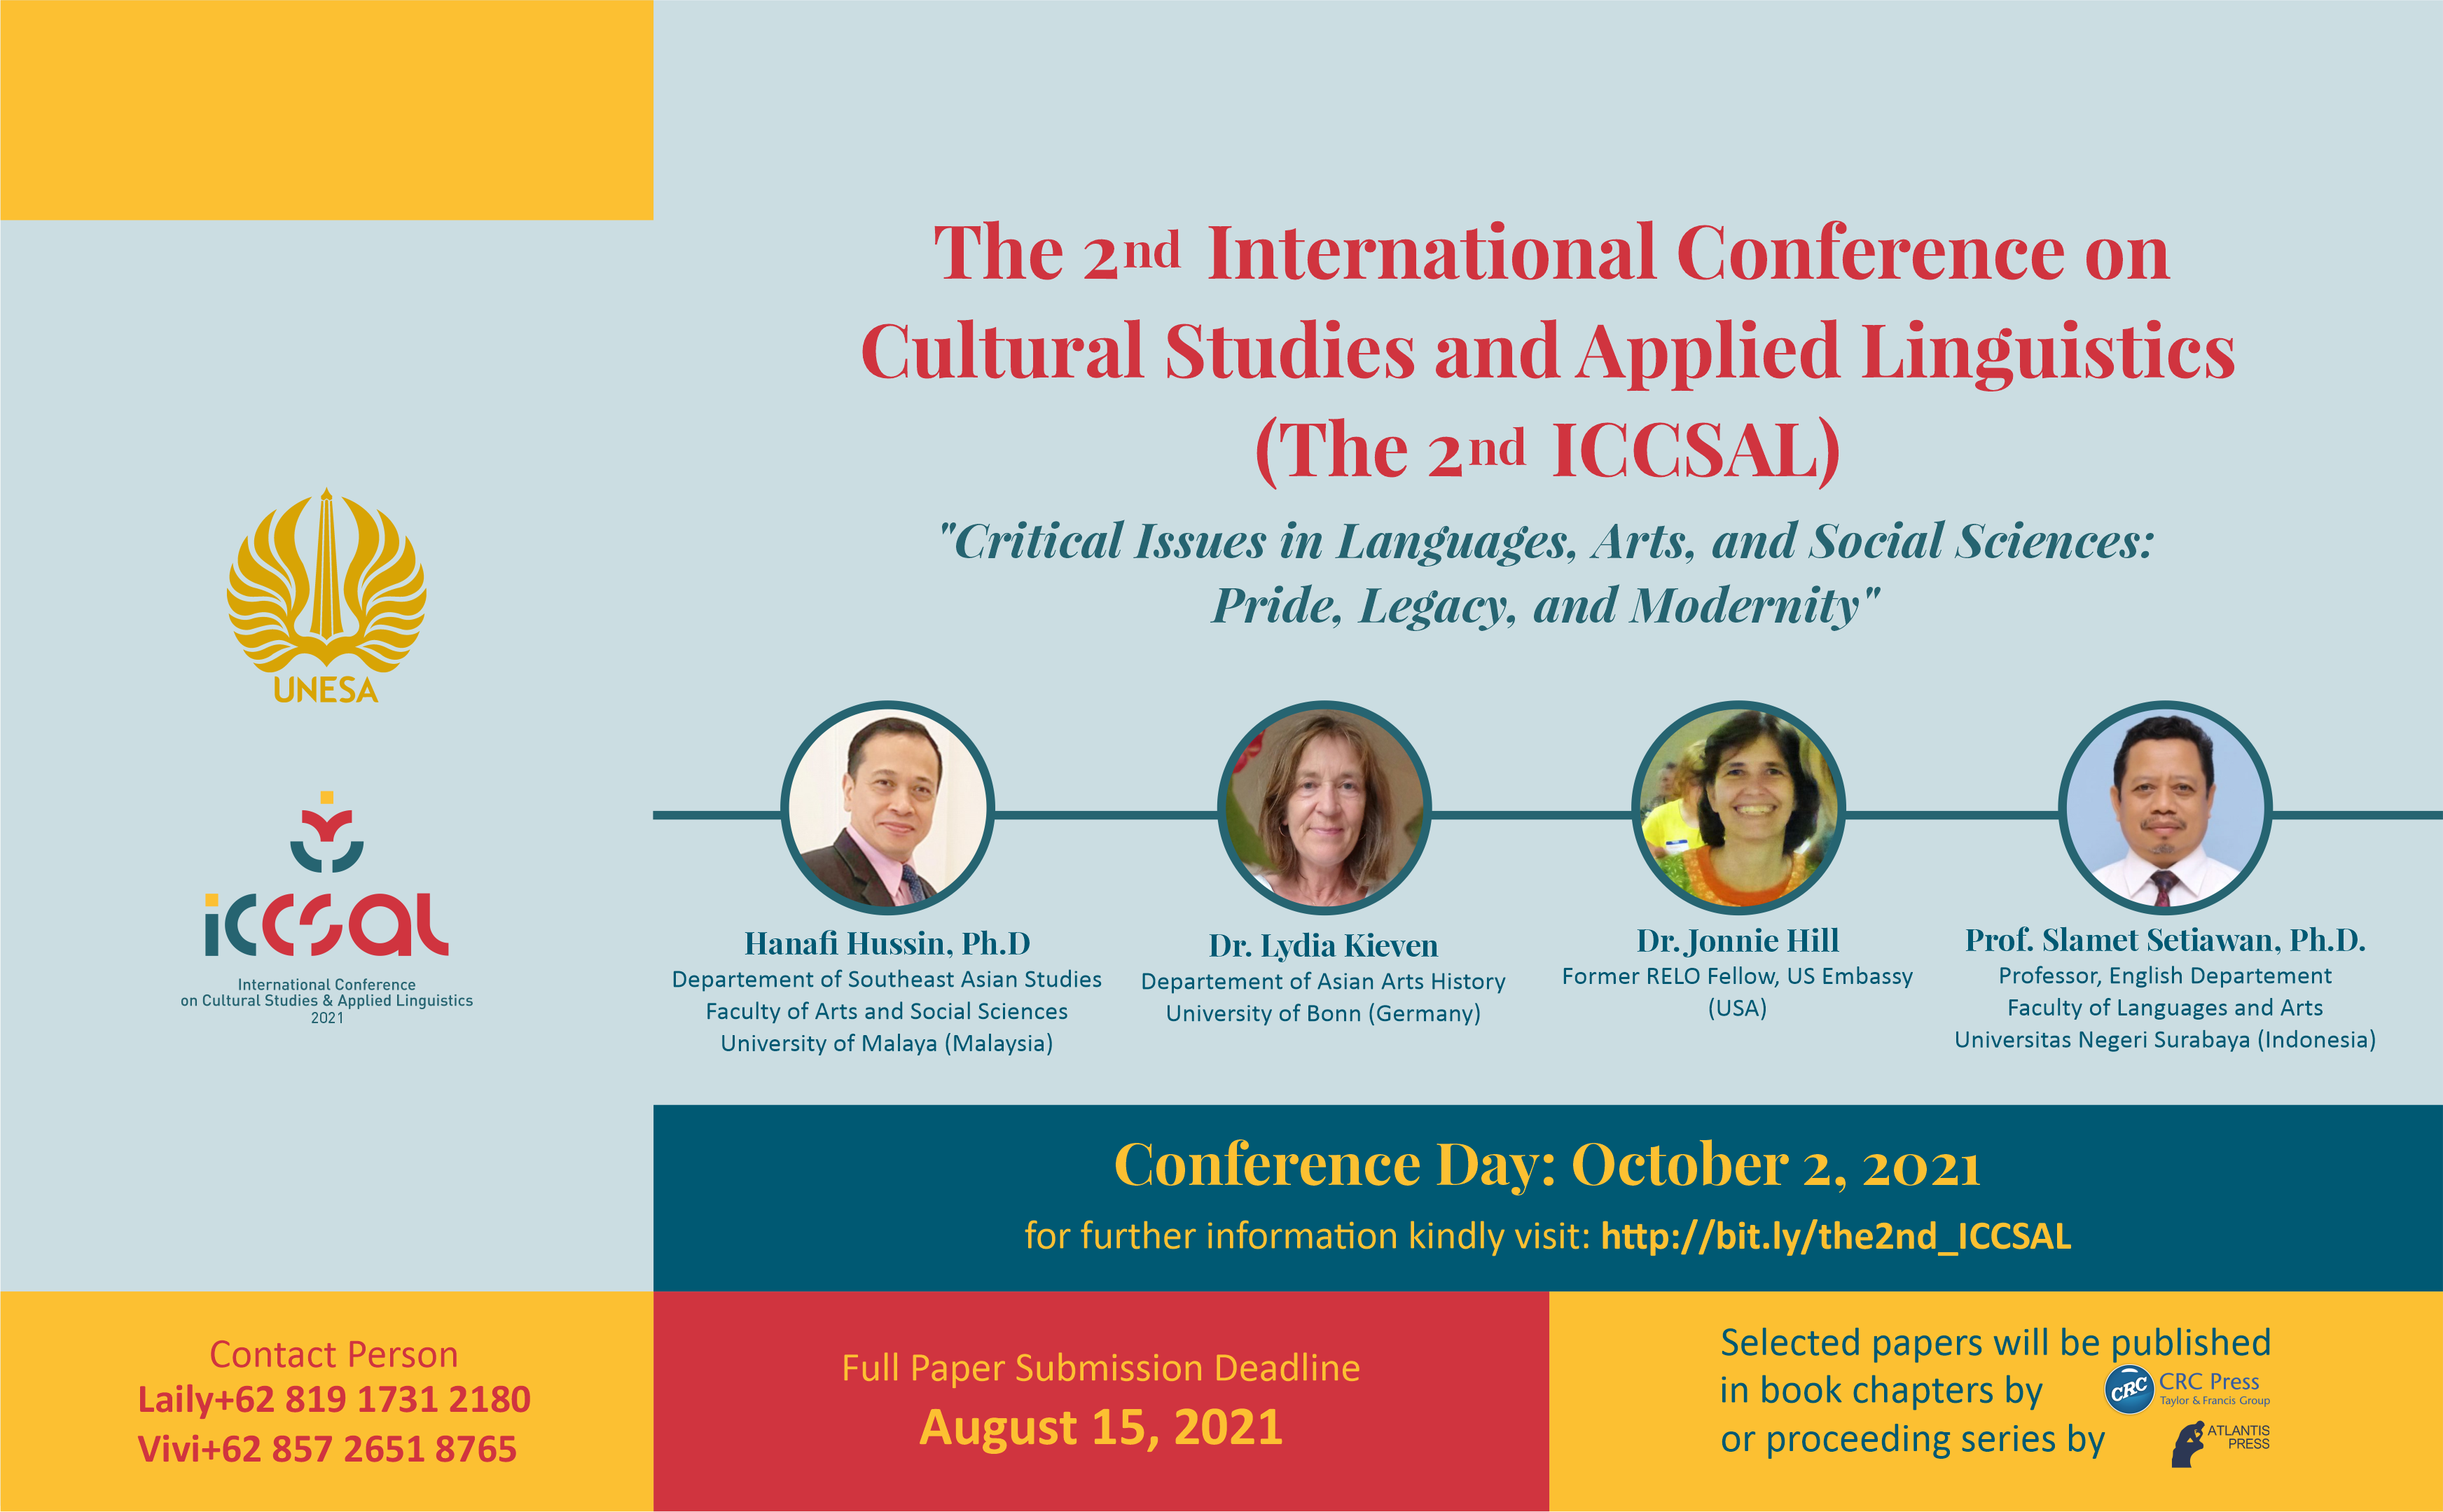 THE 2ND INTERNATIONAL CONFERENCE ON CULTURAL STUDIES AND APPLIED